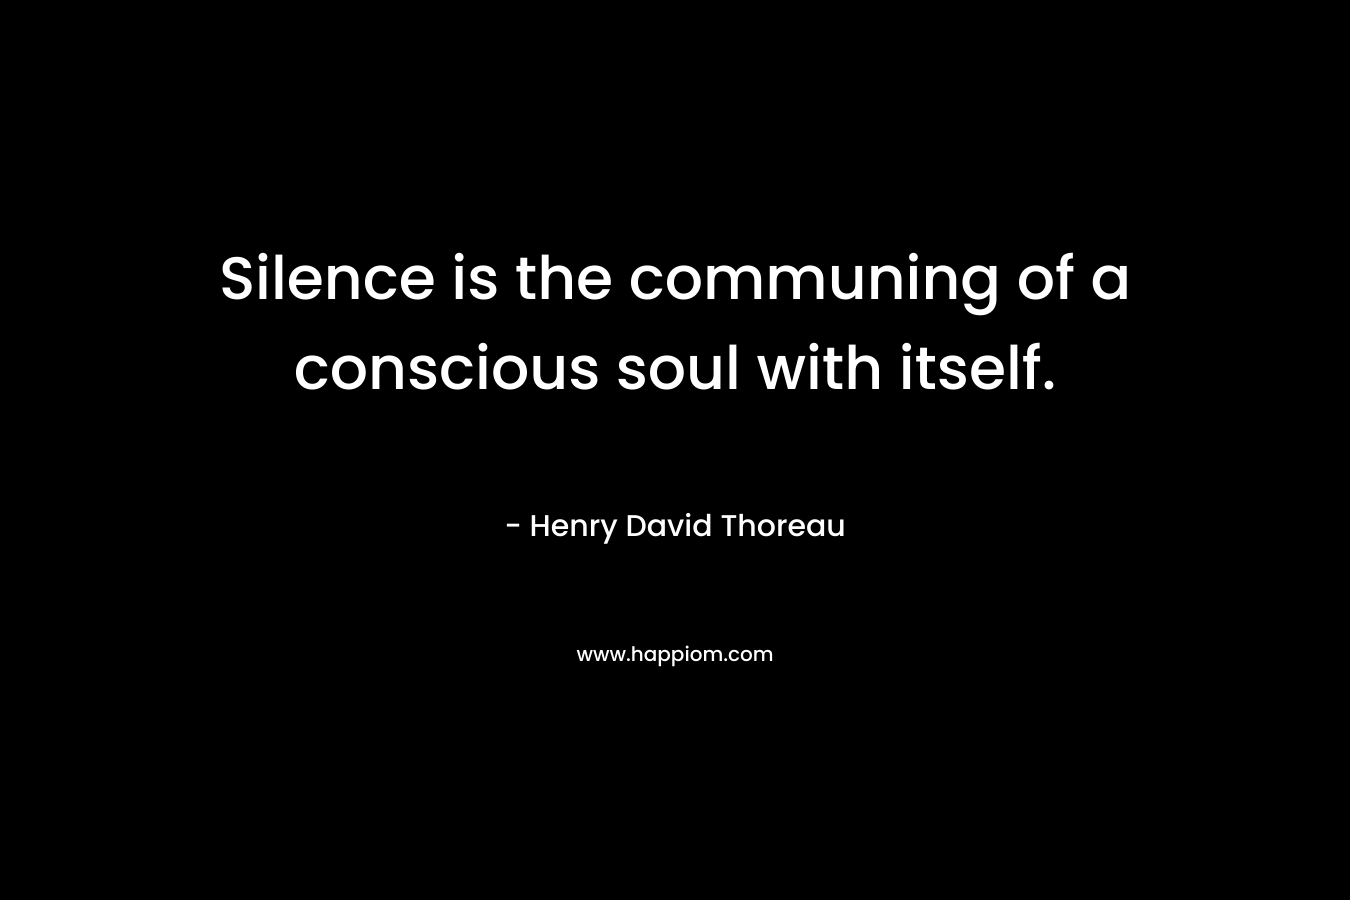 Silence is the communing of a conscious soul with itself.